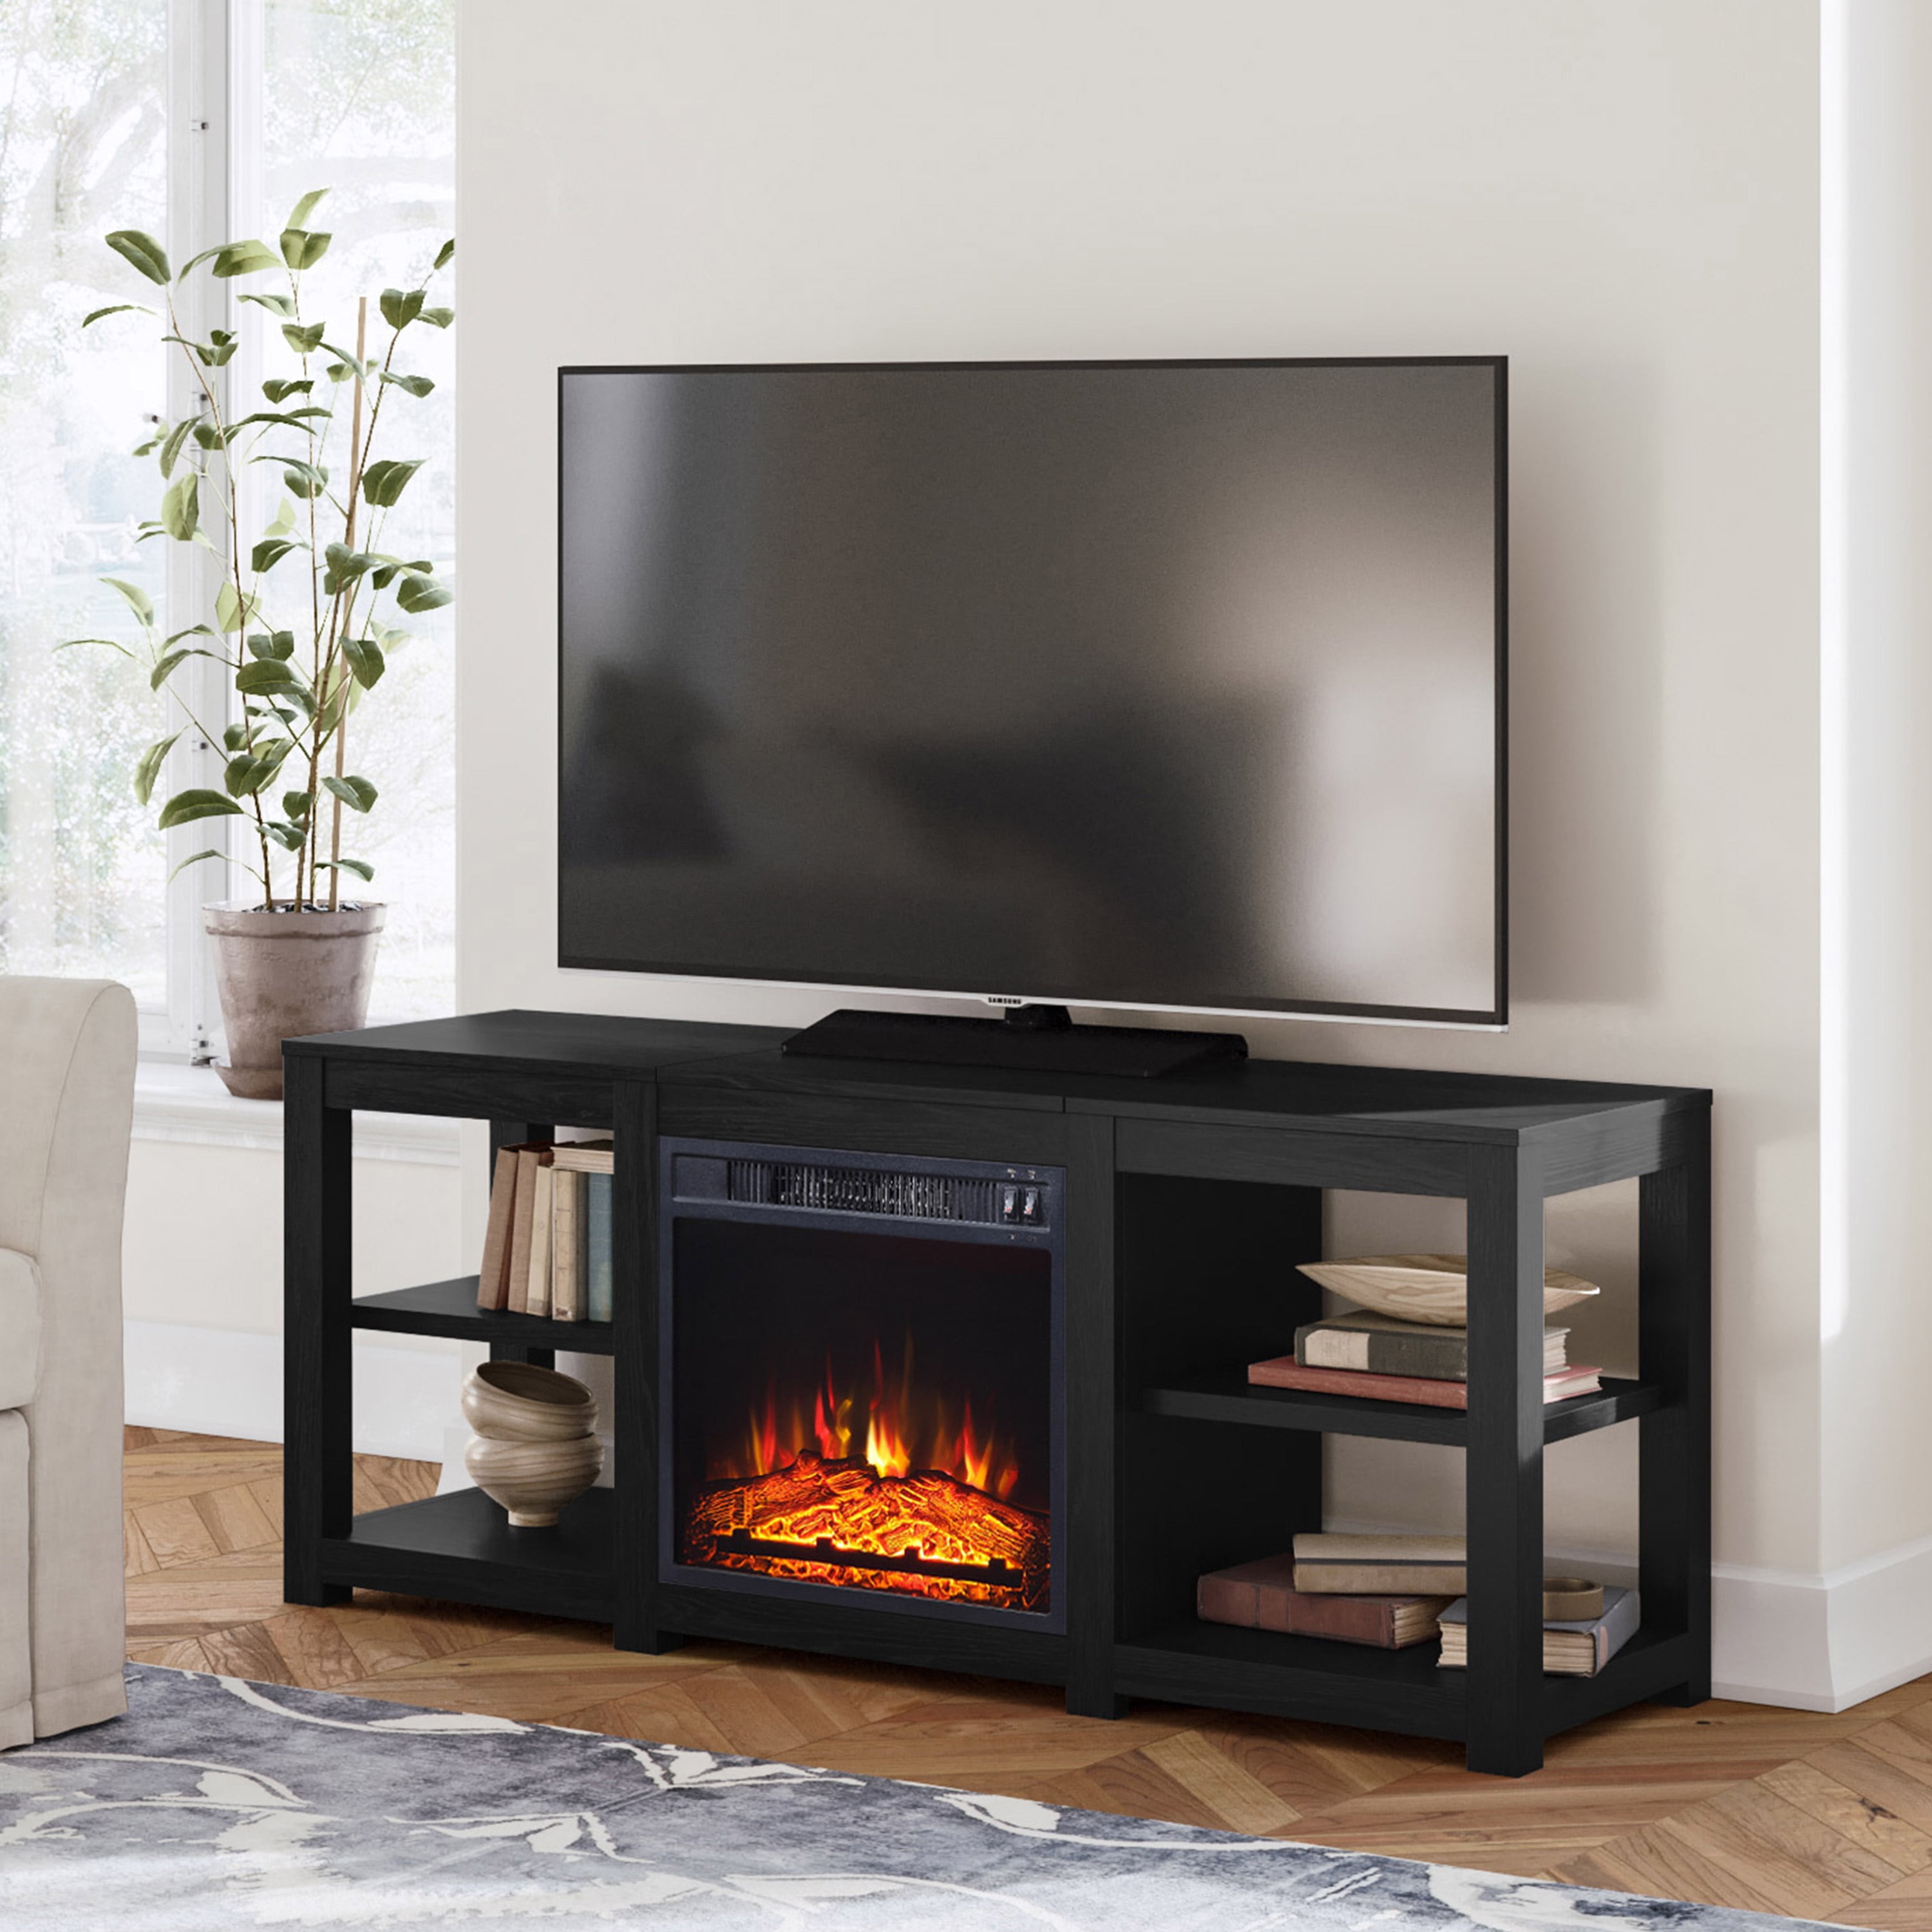 Mainstays 4-Shelf Media Fireplace TV Stand for Flat Panel ...